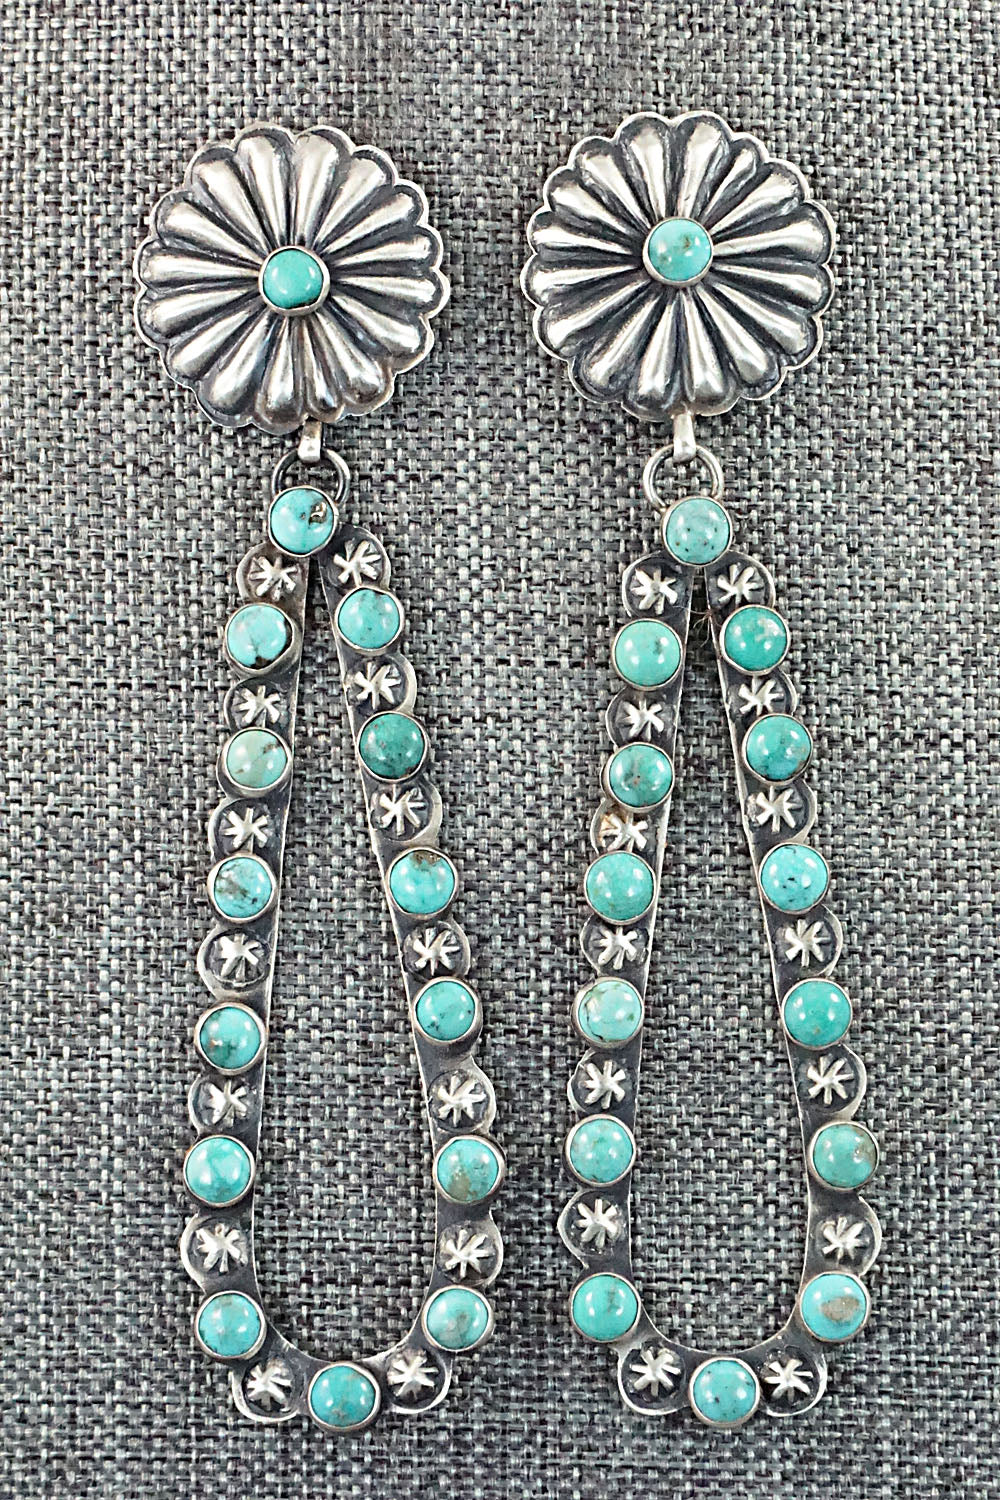 Turquoise and Sterling Silver Earrings - Eugene Charley